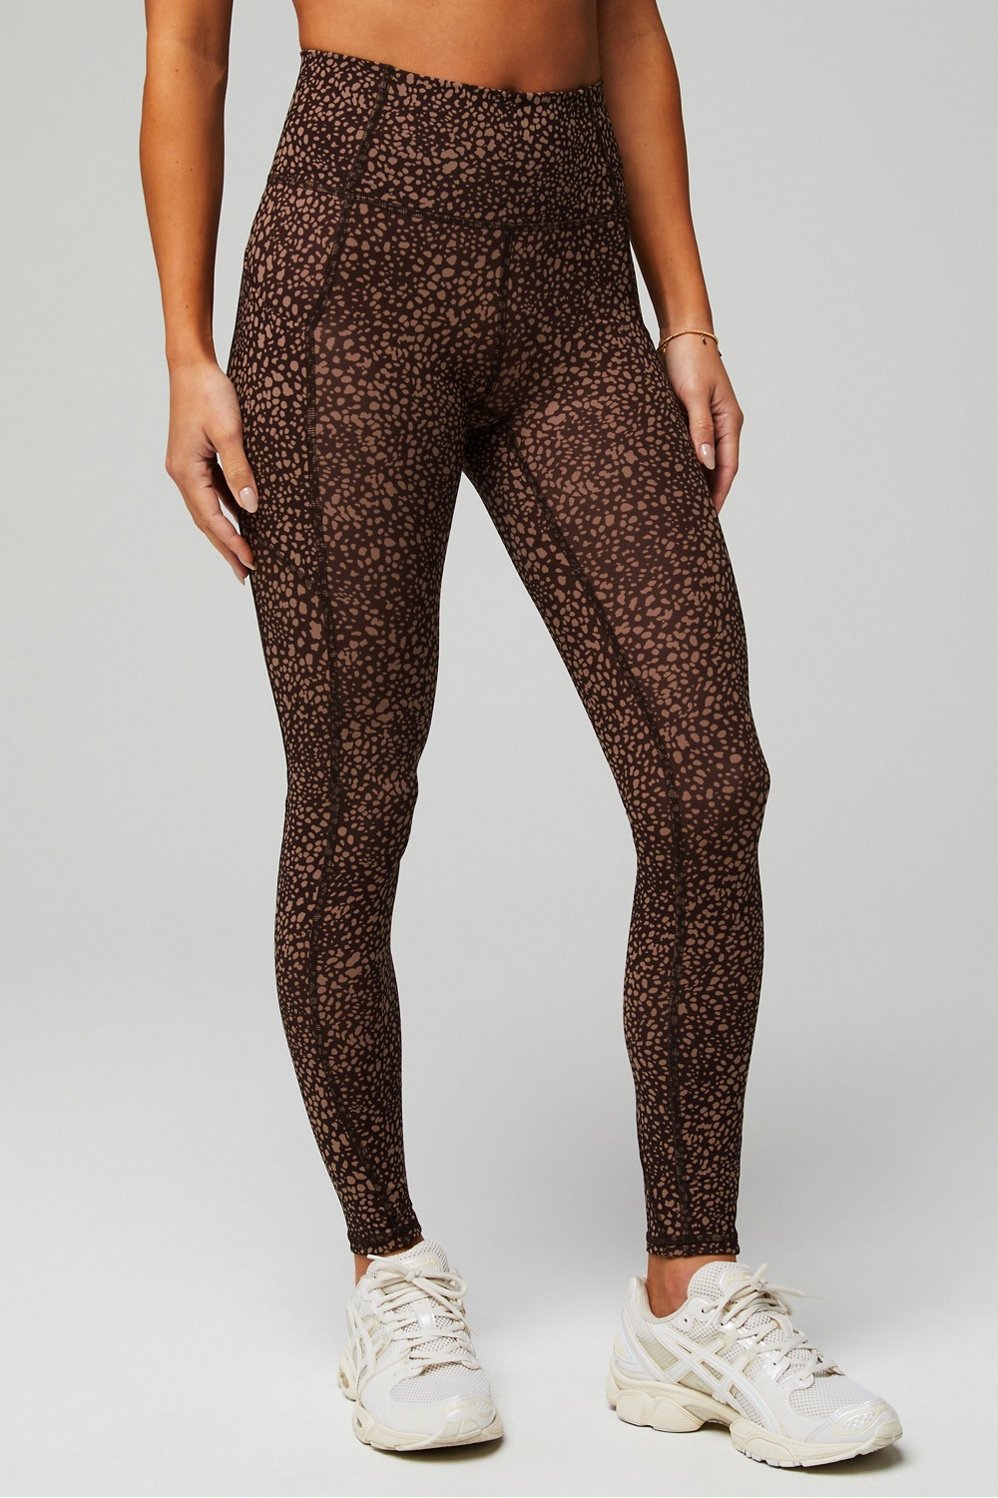 Wild Child Leopard Leggings – Initial Outfitters